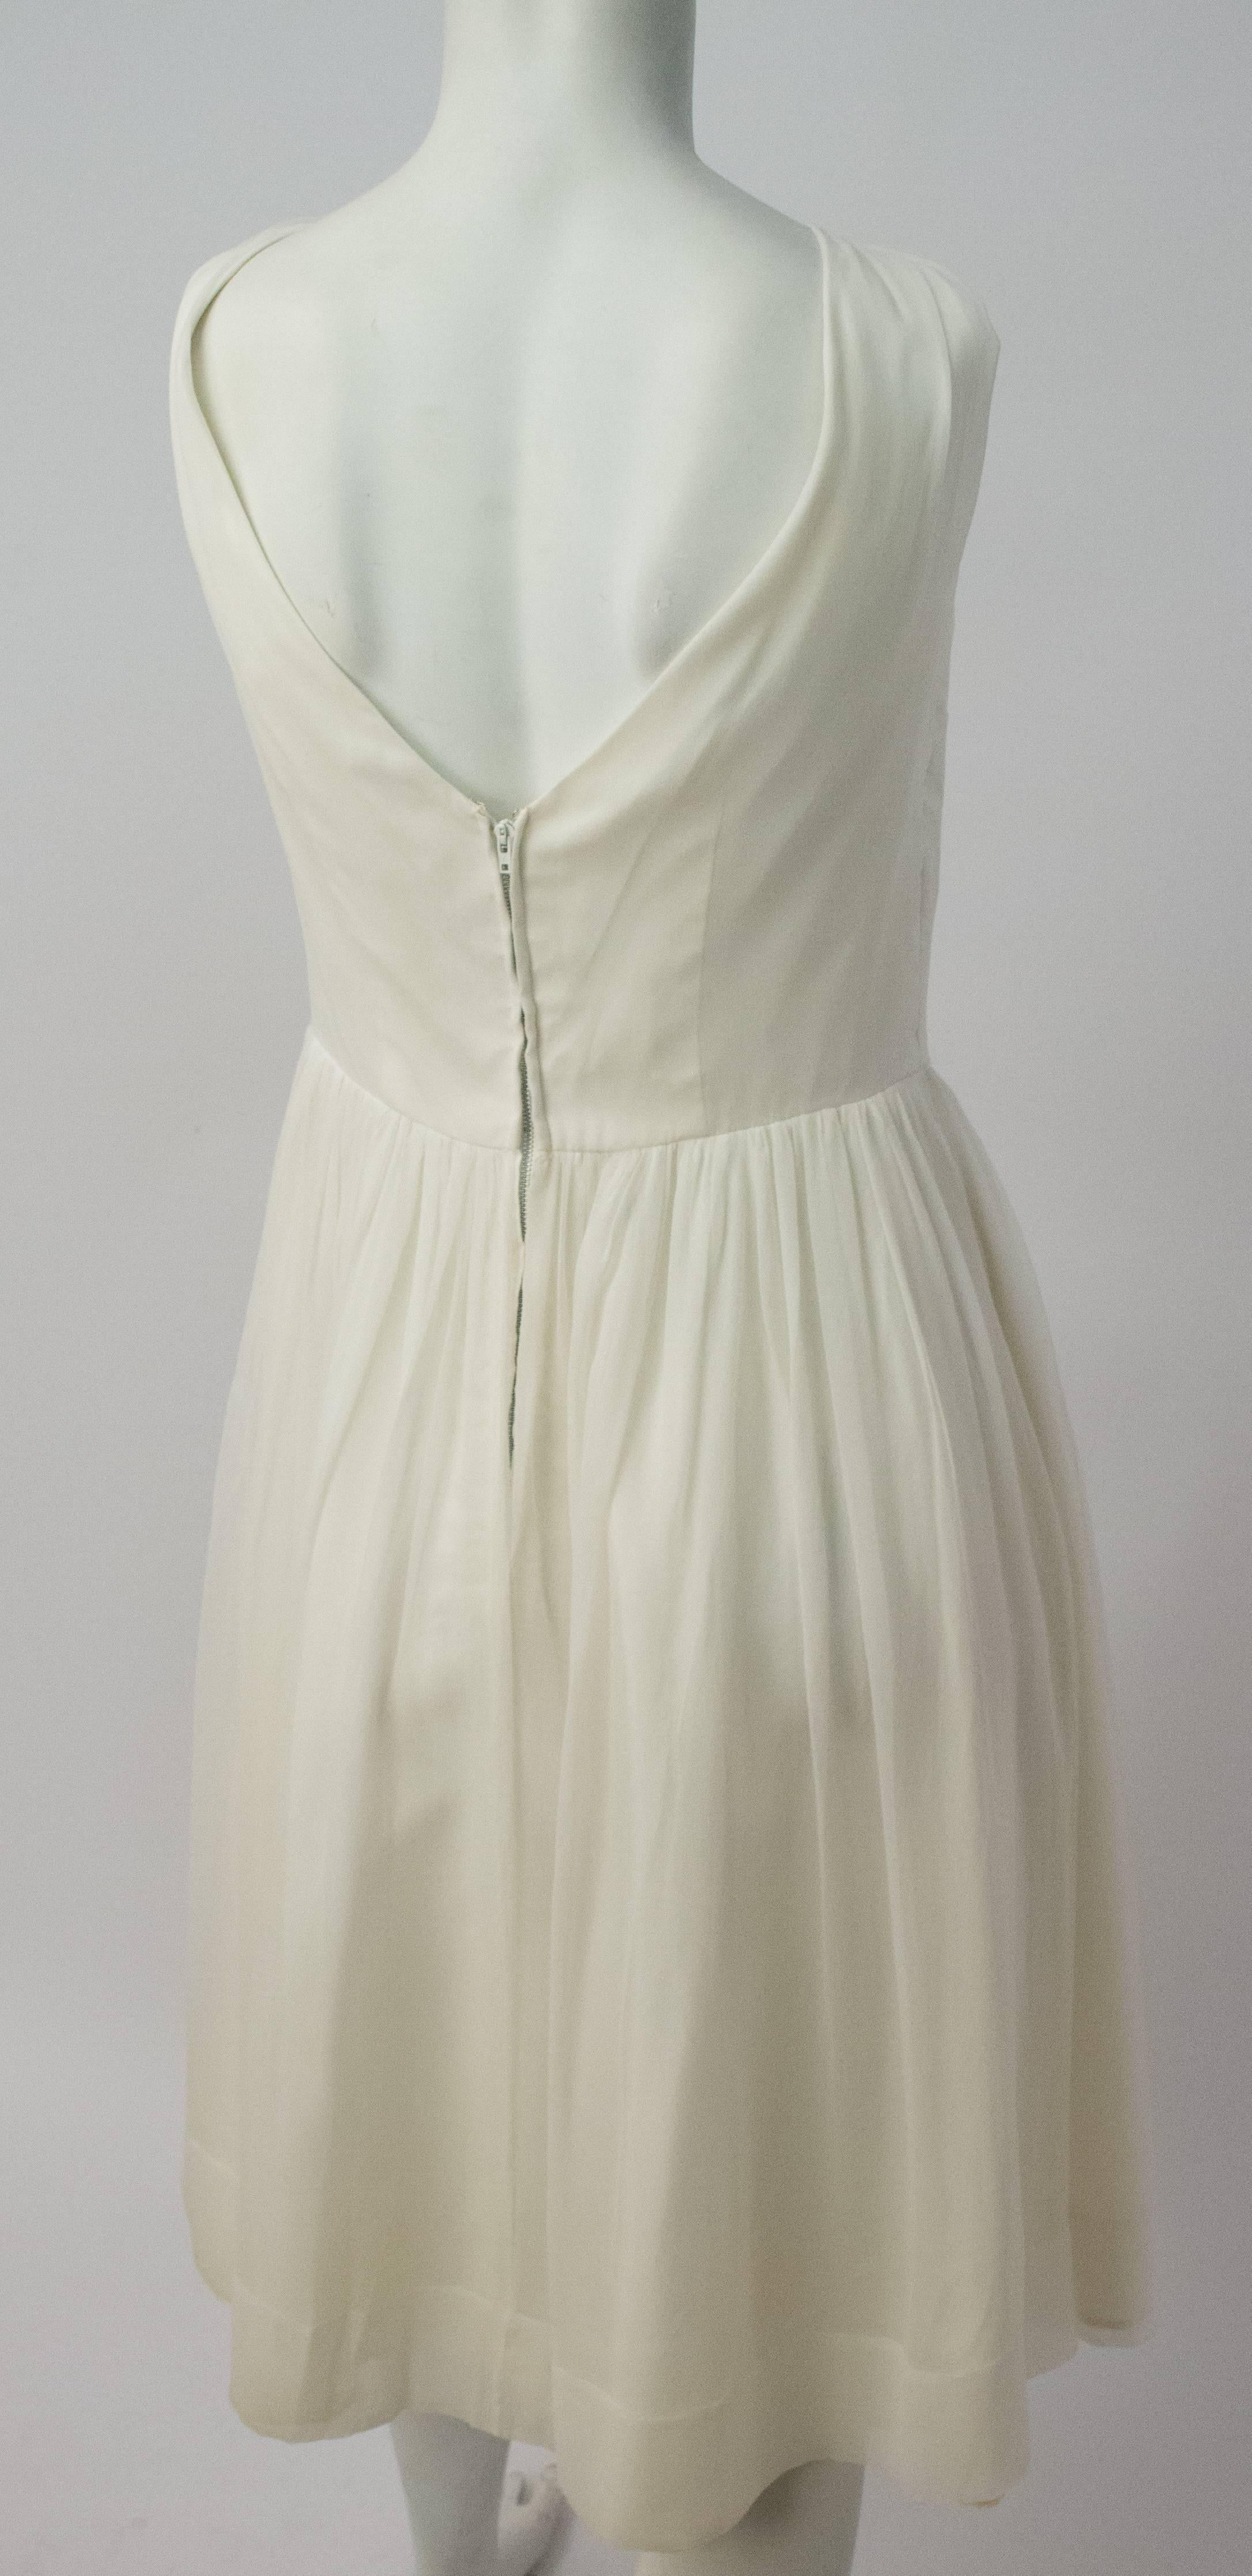 50s White Chiffon and Satin Party Dress. Fully lined. Metal back zip. Some discoloration on lining, not visible from outside.